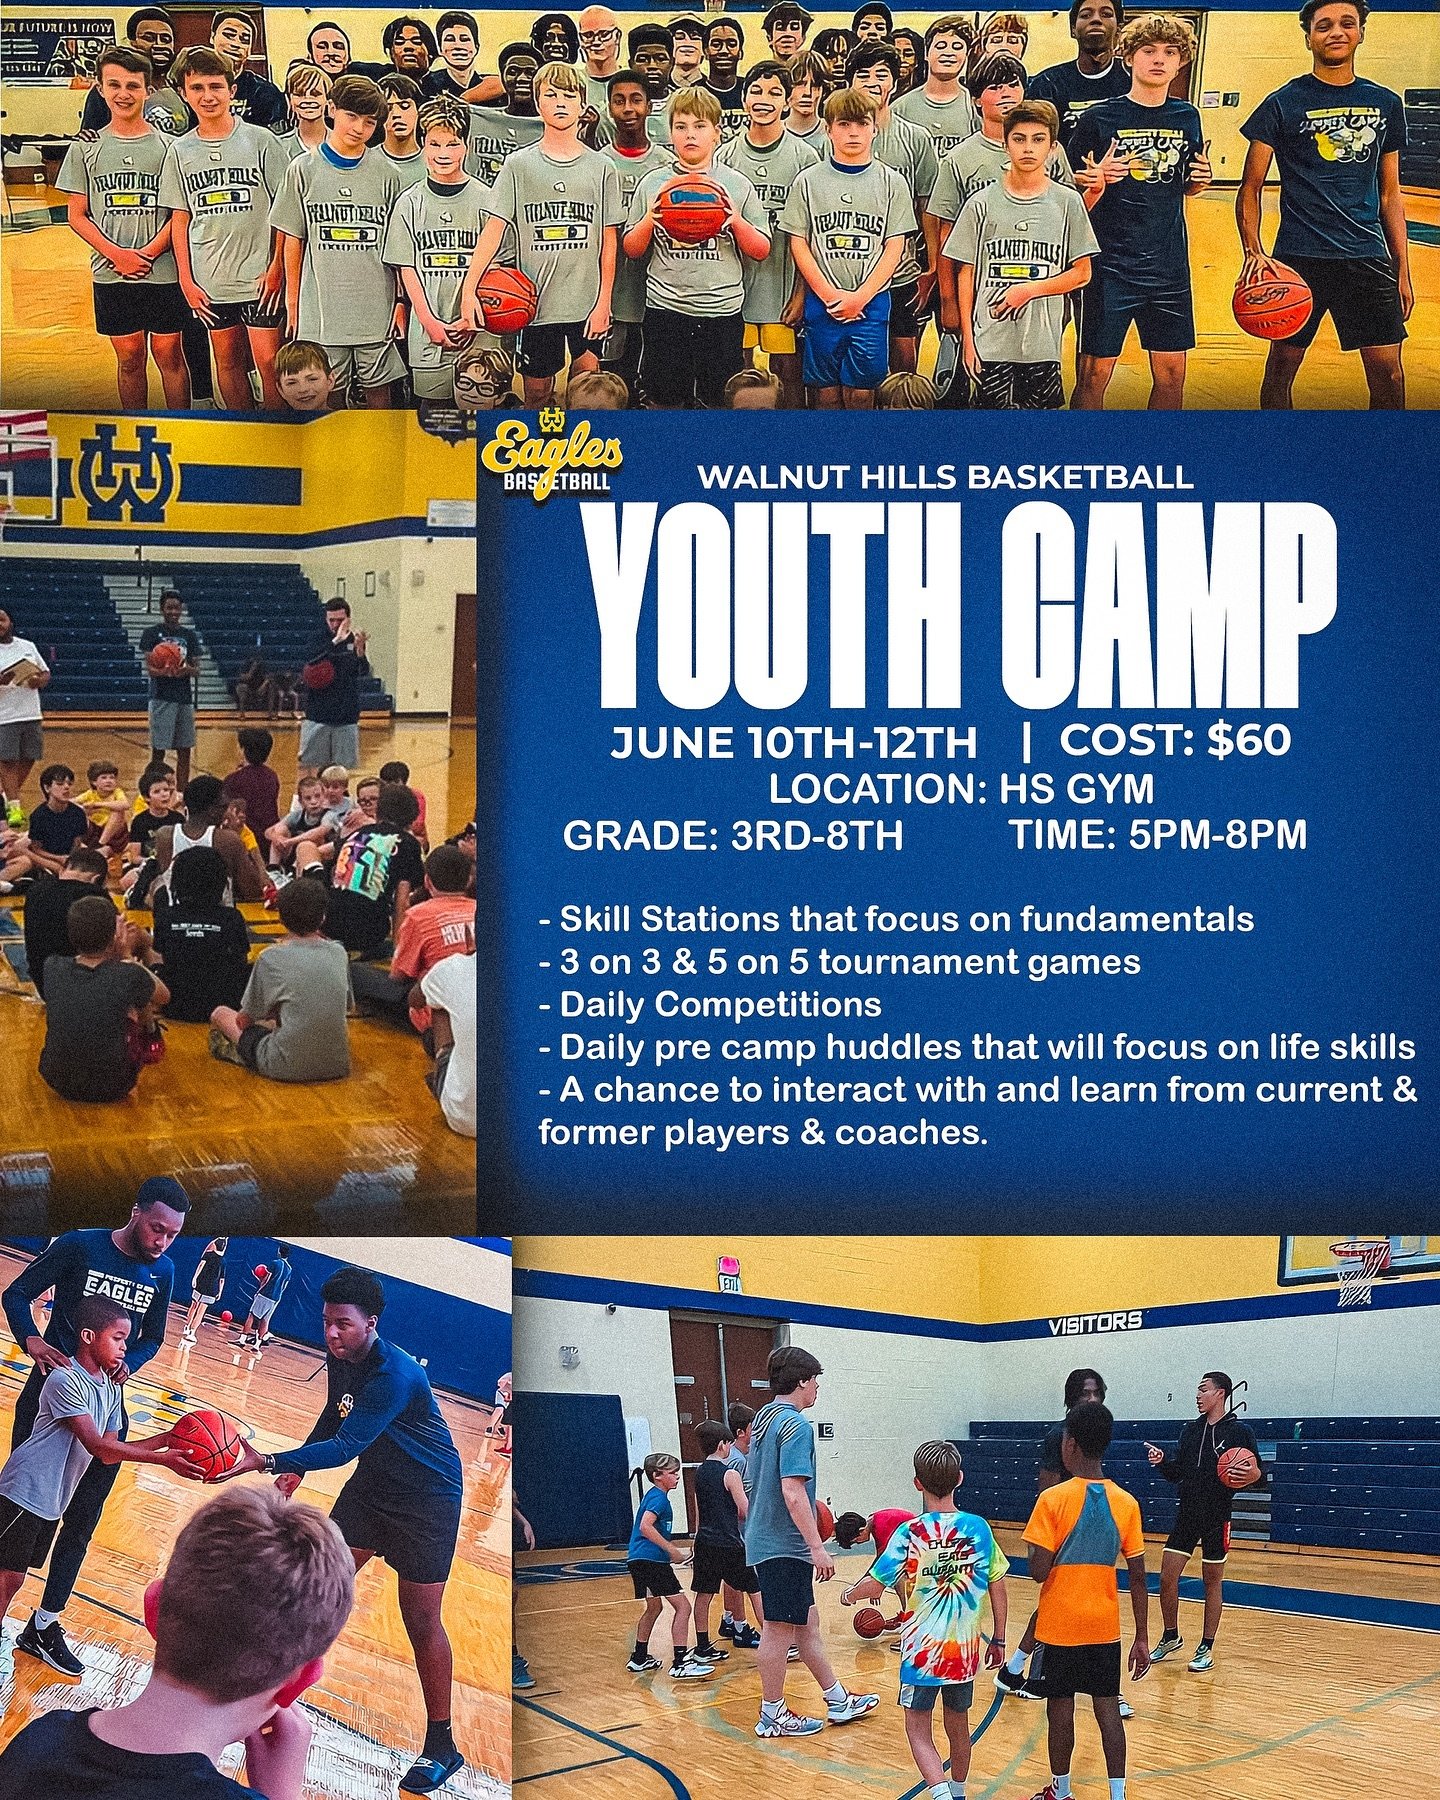 It&rsquo;s almost Camp Season! June 10th-12th we will be having our annual Summer Youth Camp. Registration Link in available in our bio. See you there! 🦅🏀